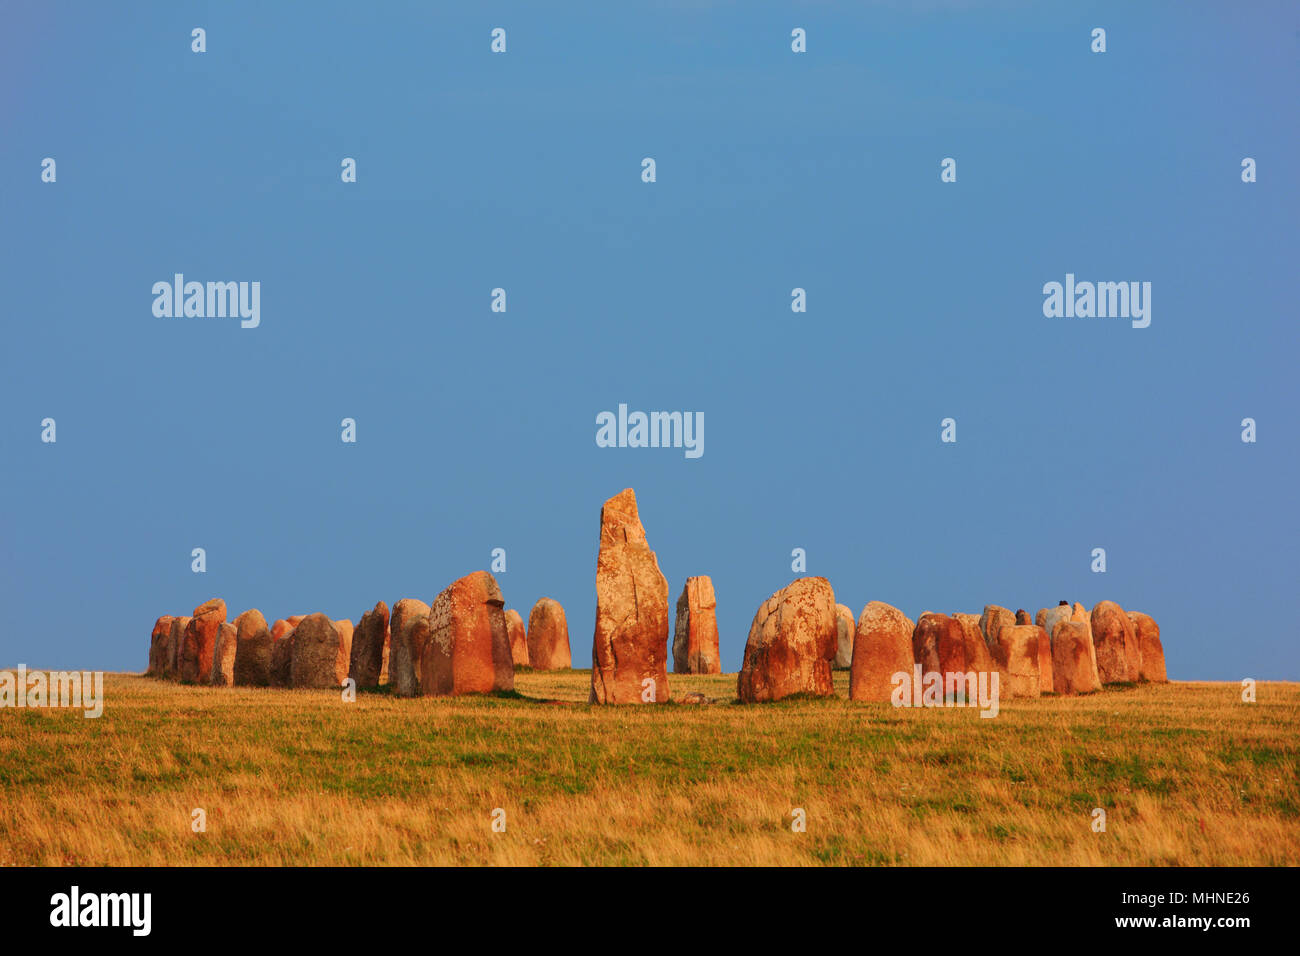 Ale stones (Ales stenar) is an anicient megalithic stone ship monument formed by 59 large boulders in the province of Scania in southern Sweden Stock Photo